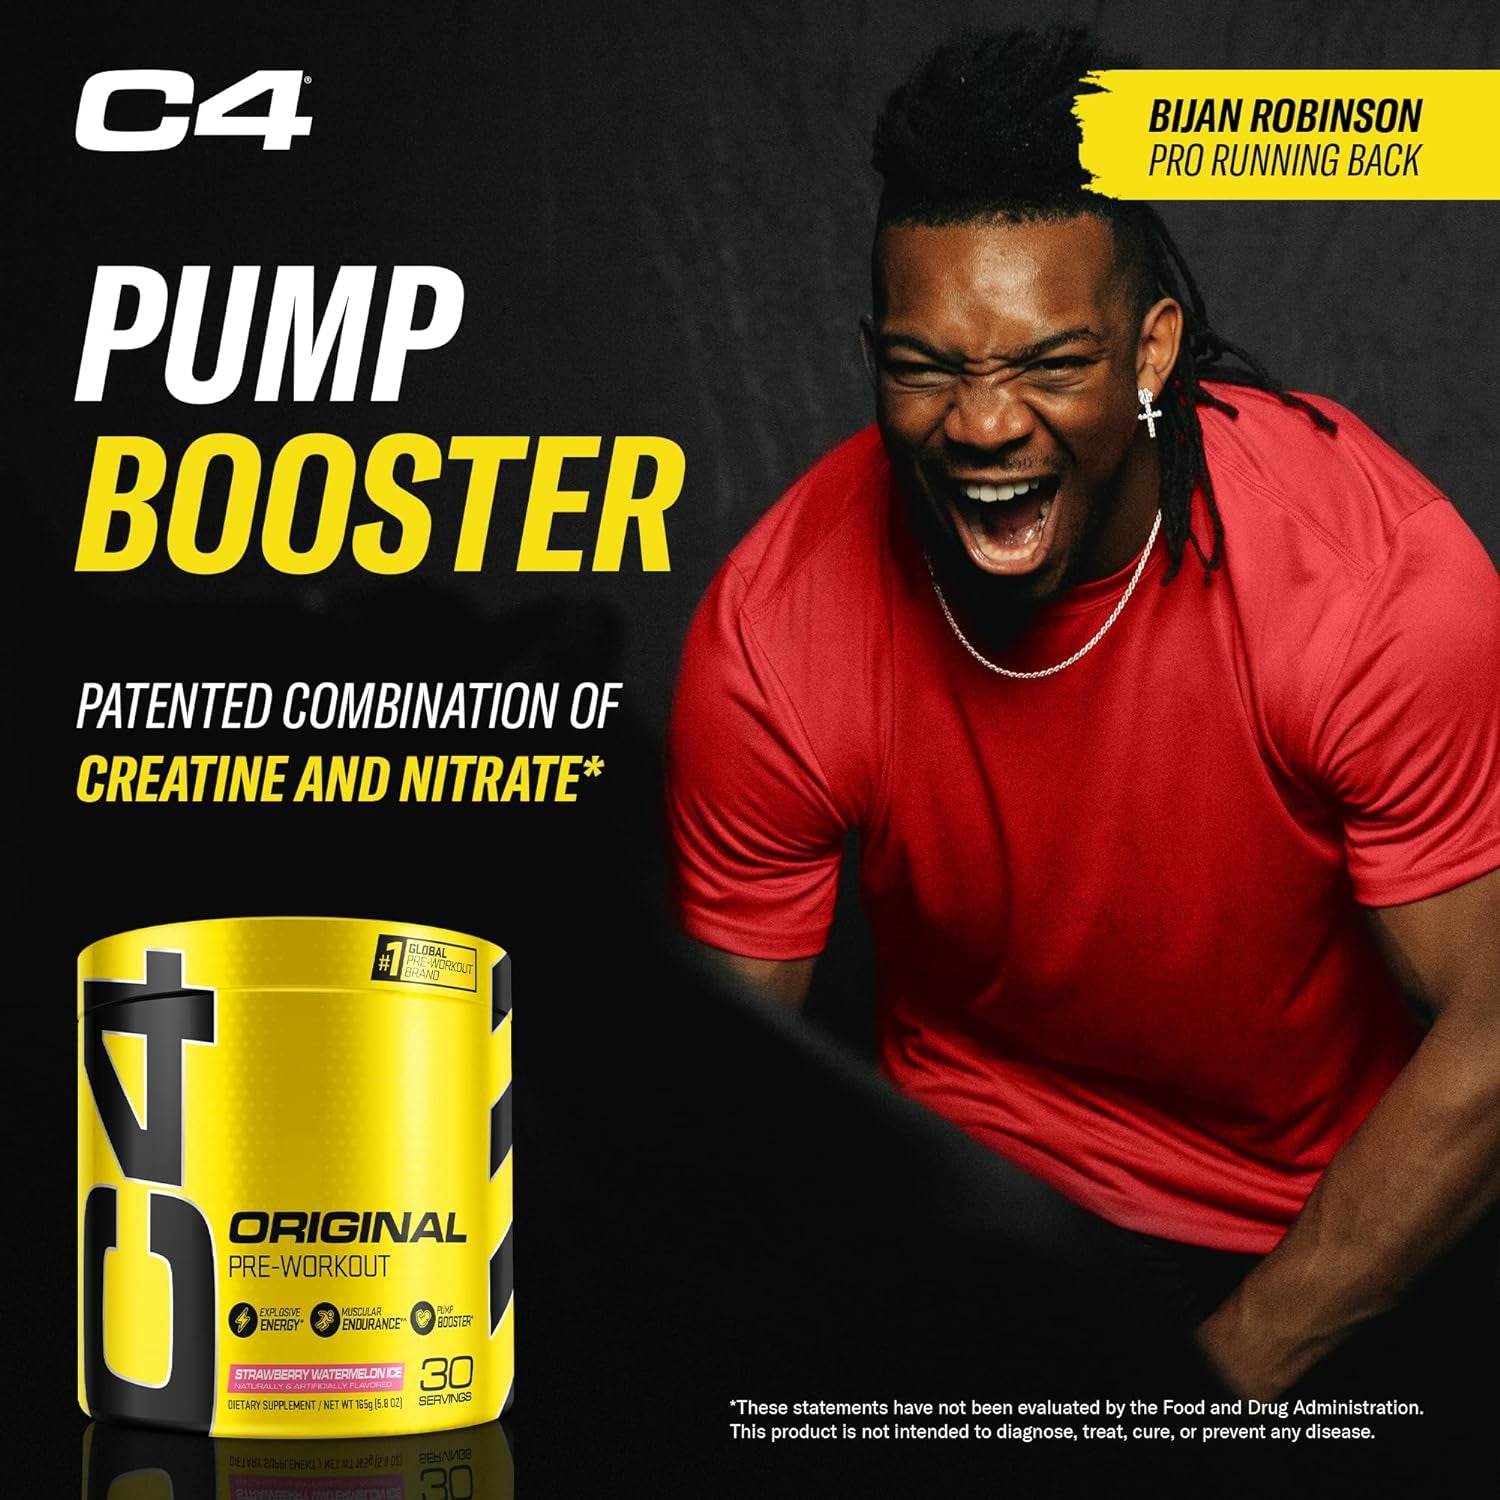 C4 Original Pre Workout Powder Strawberry Watermelon Ice Sugar Free Preworkout Energy for Men & Women 150Mg Caffeine + Beta Alanine + Creatine - 30 Servings (Packaging May Vary)